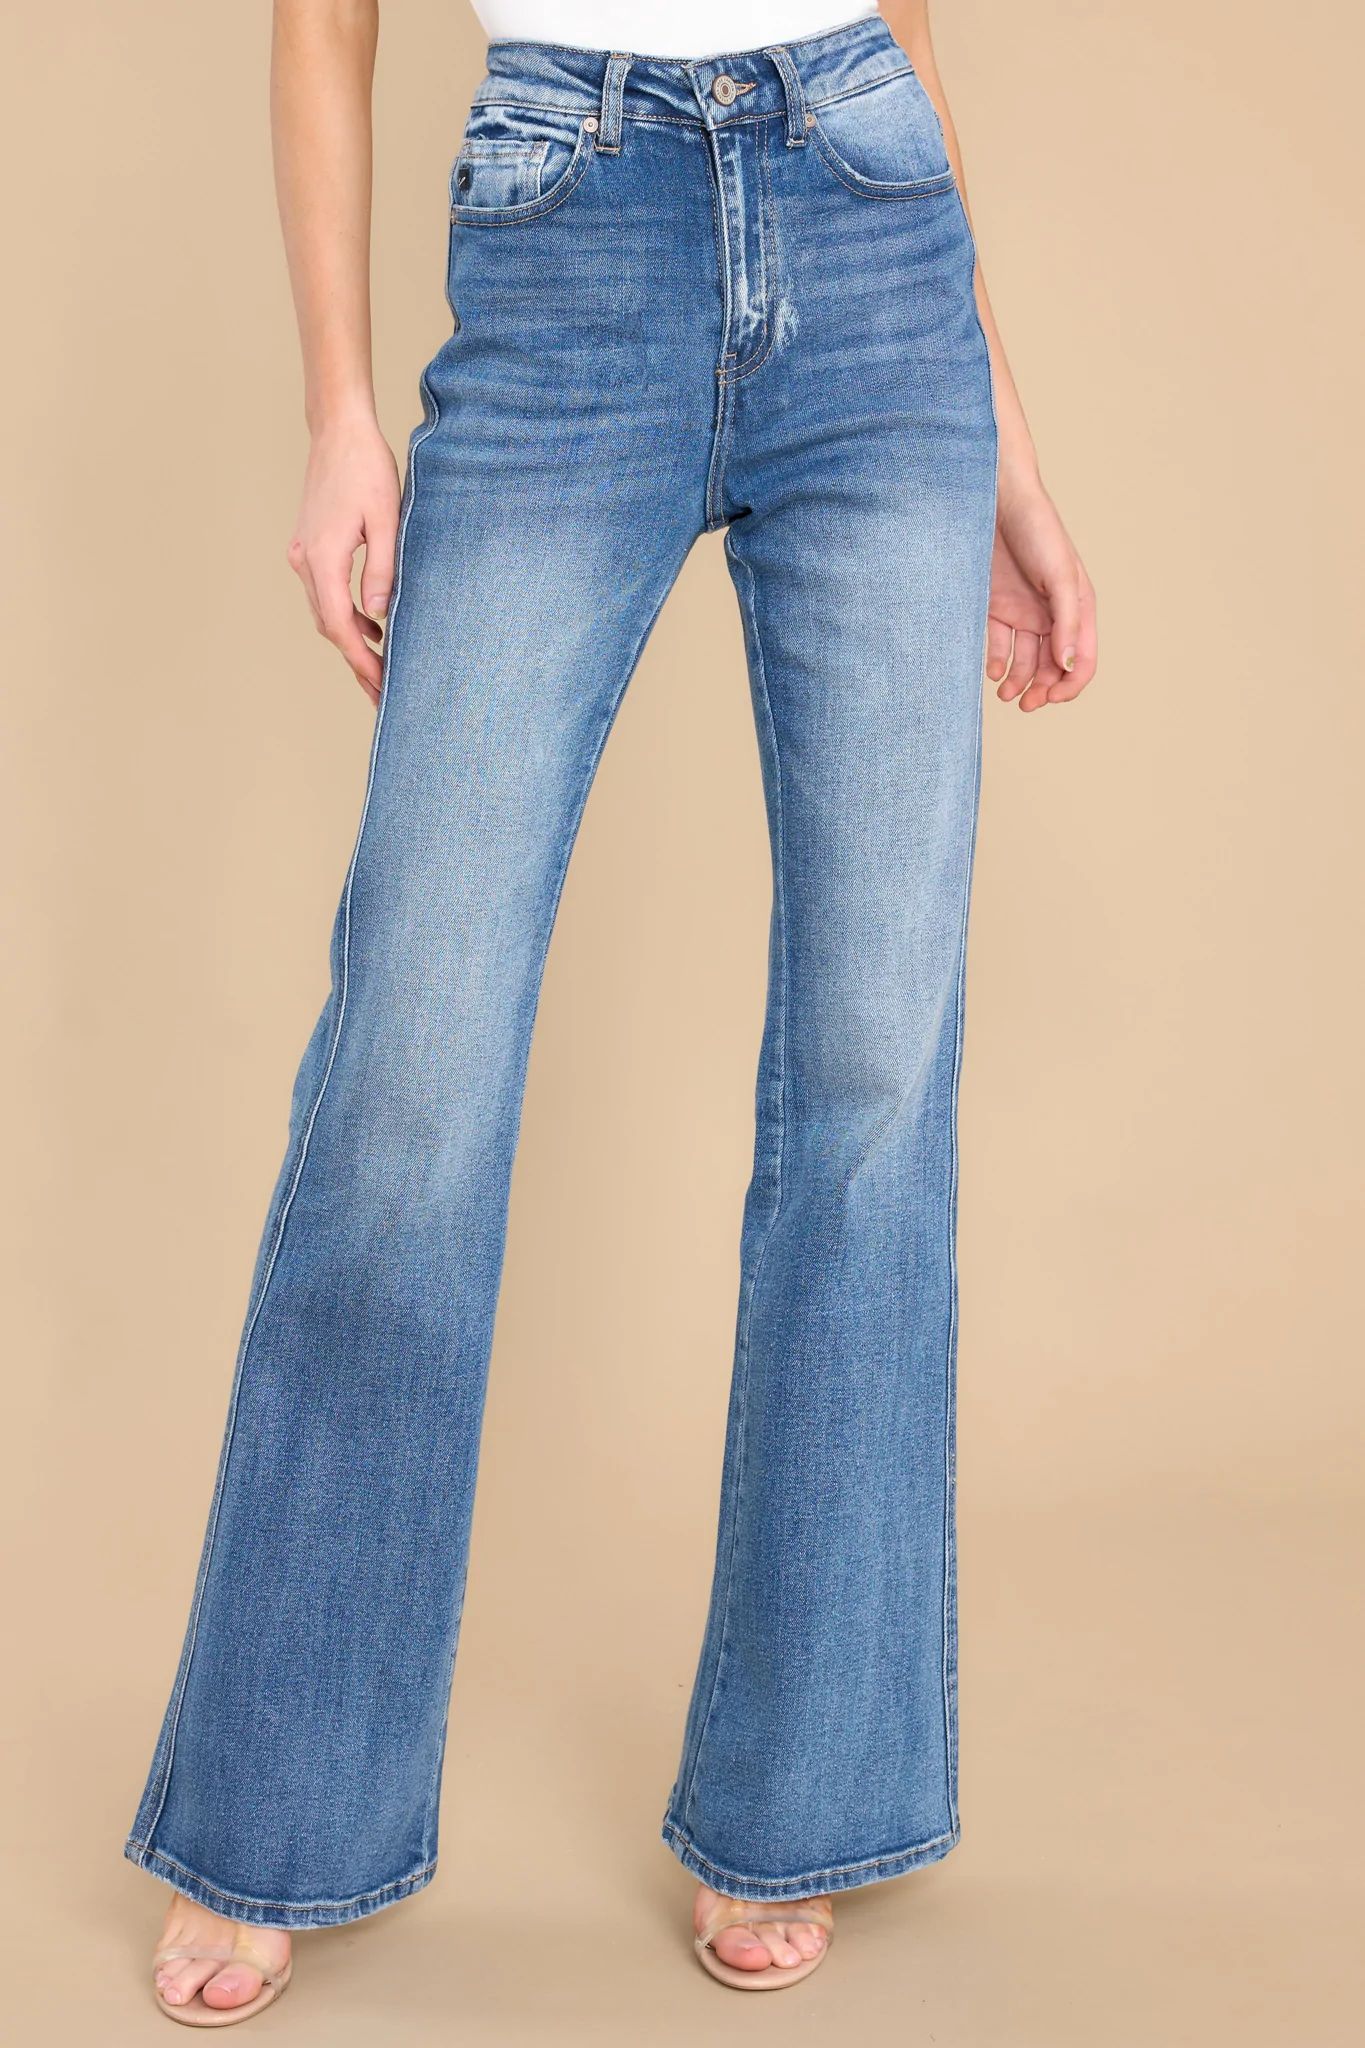 Everything Counts Medium Wash Wide Leg Jeans | Red Dress 